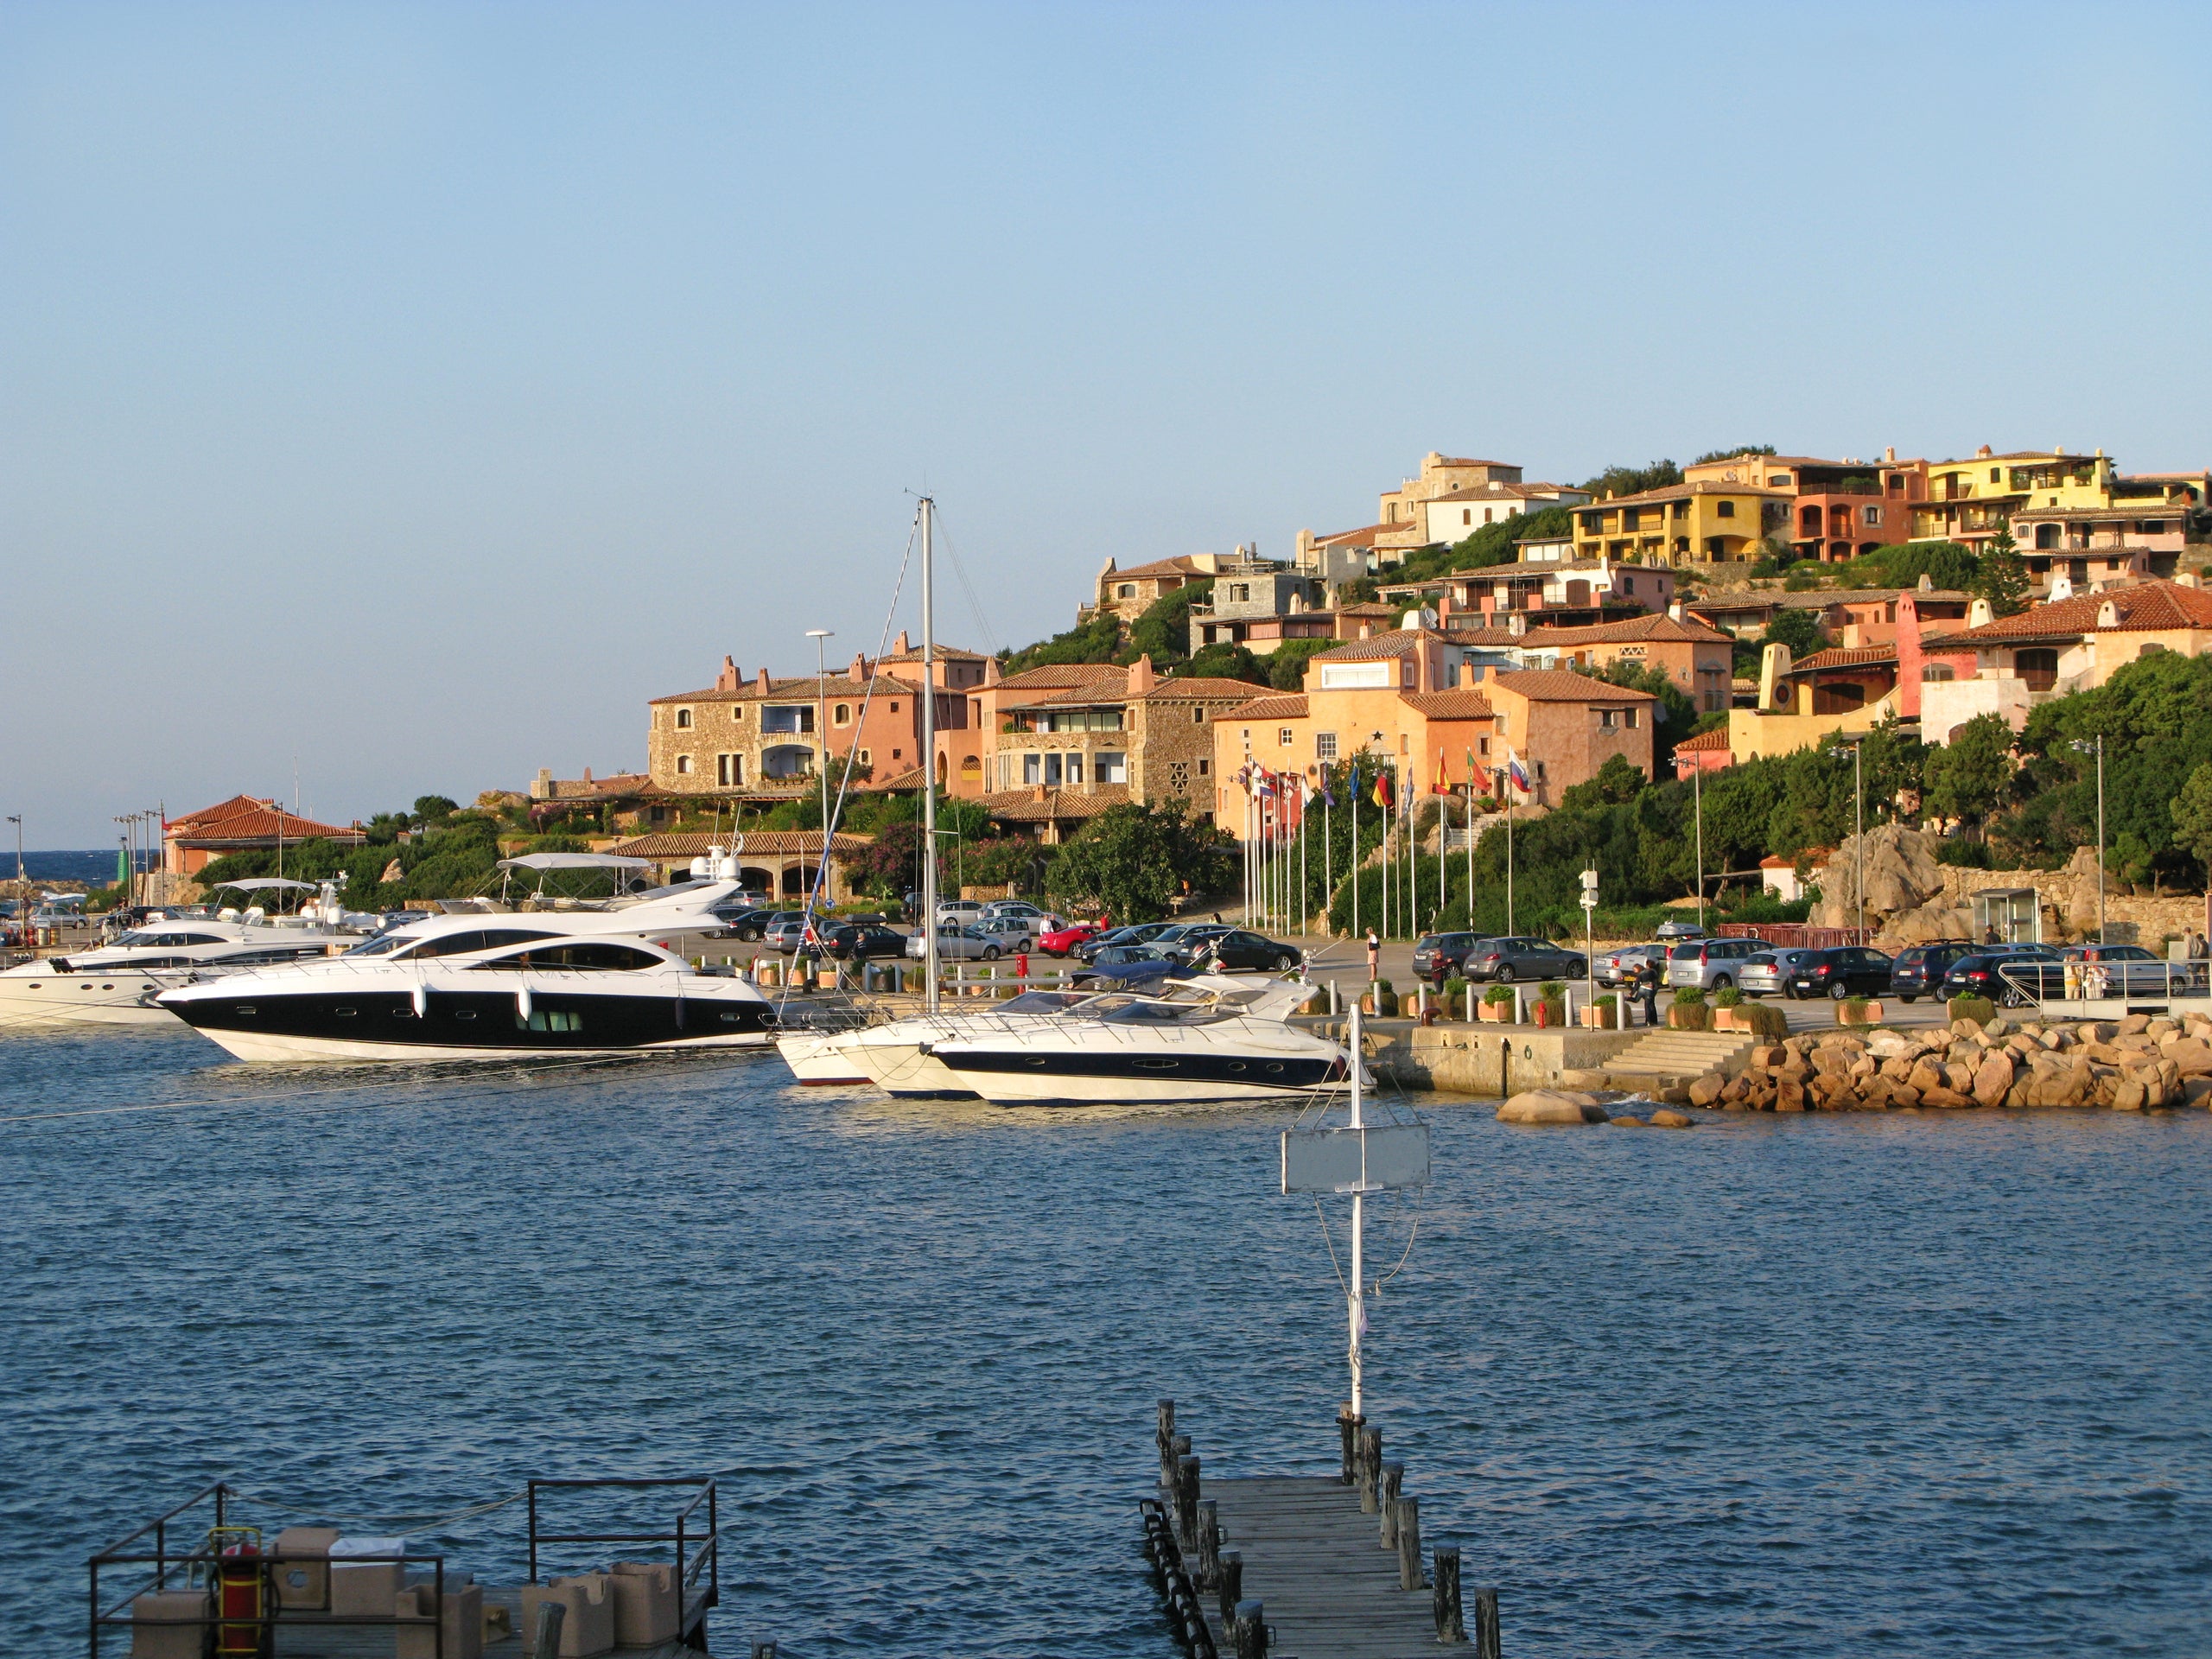 The luxury seaside resort of Porto Cervo sprung up in the 1960s and is a popular spot for luxury yachts